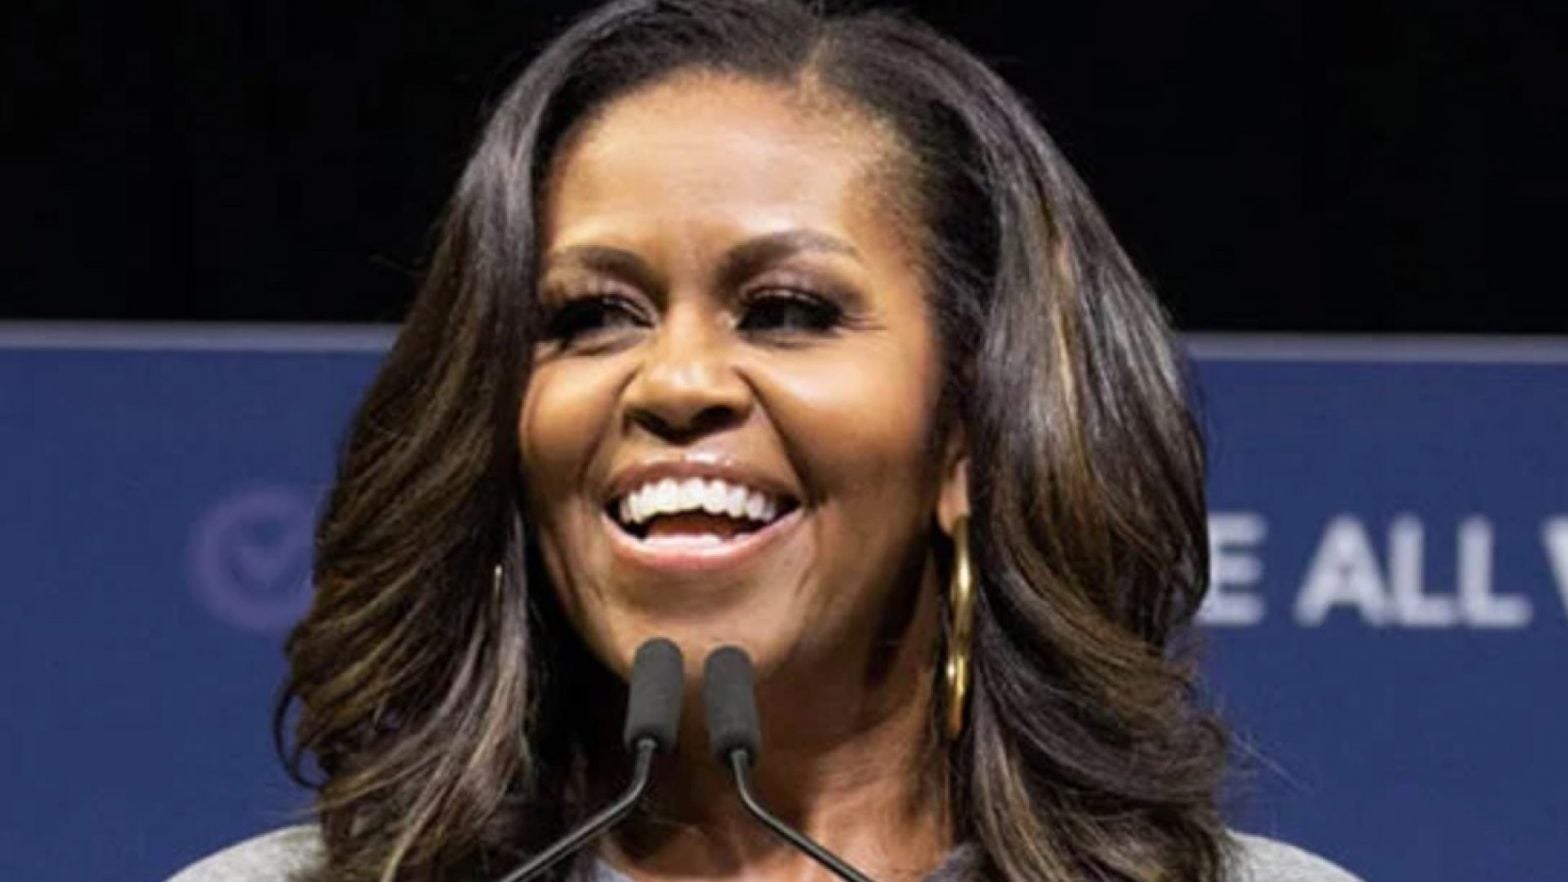 Michelle Obama and Celebs Pen Open Letter About Fight For Voting Rights